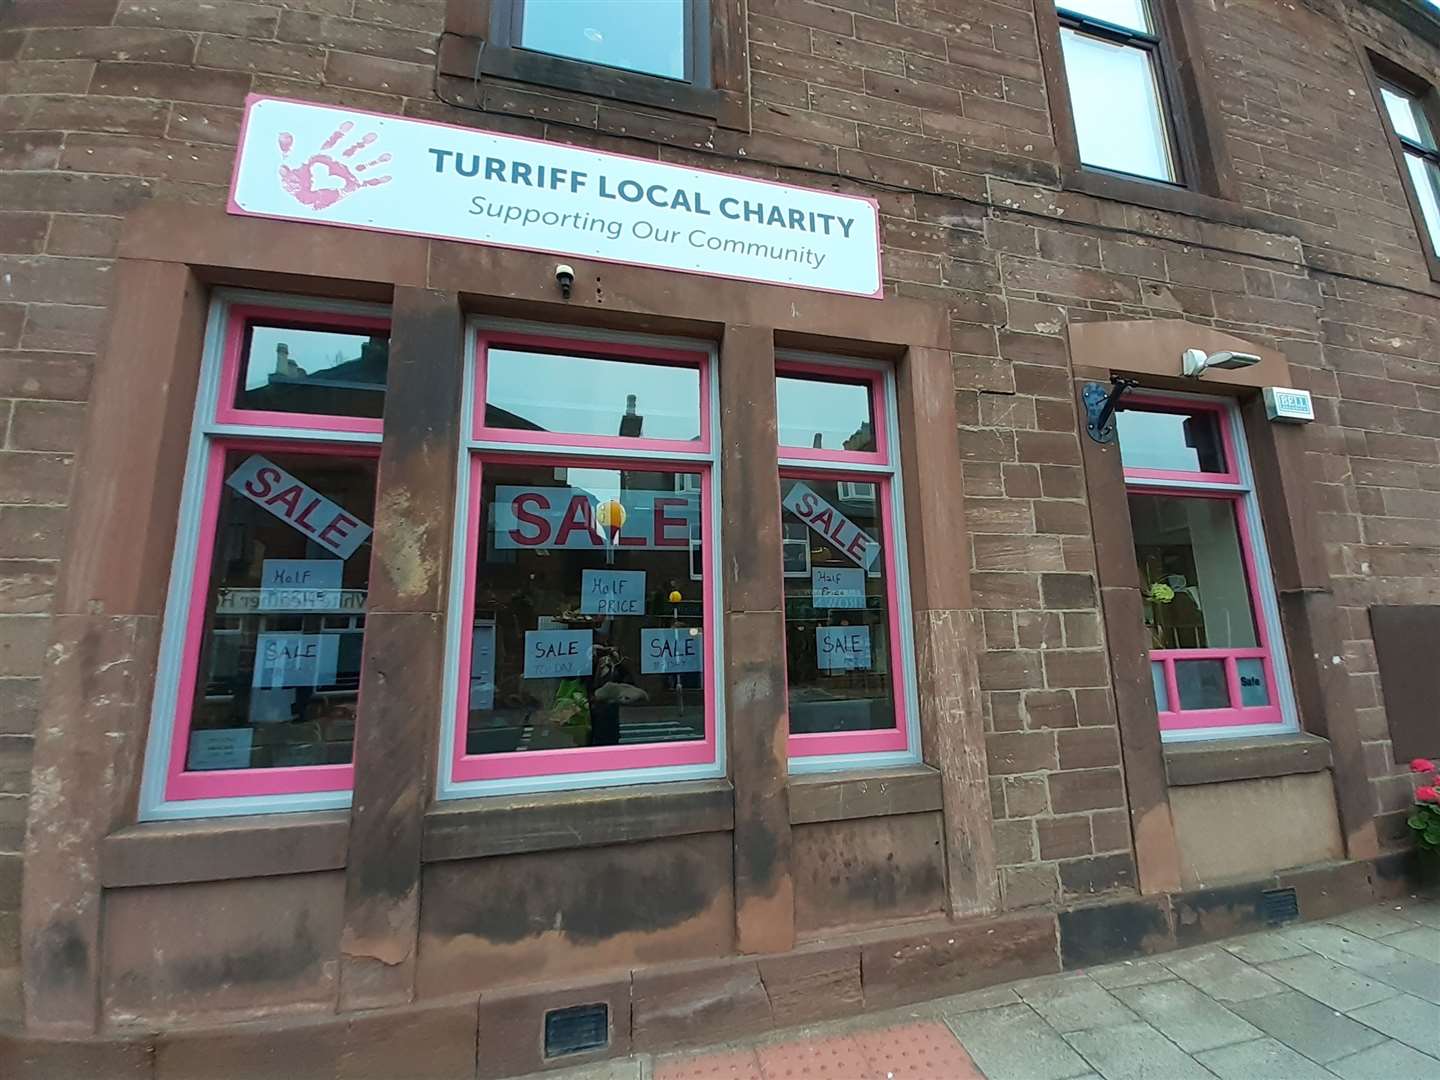 The TLC charity shop has received funding towards a project to improve its internal layout